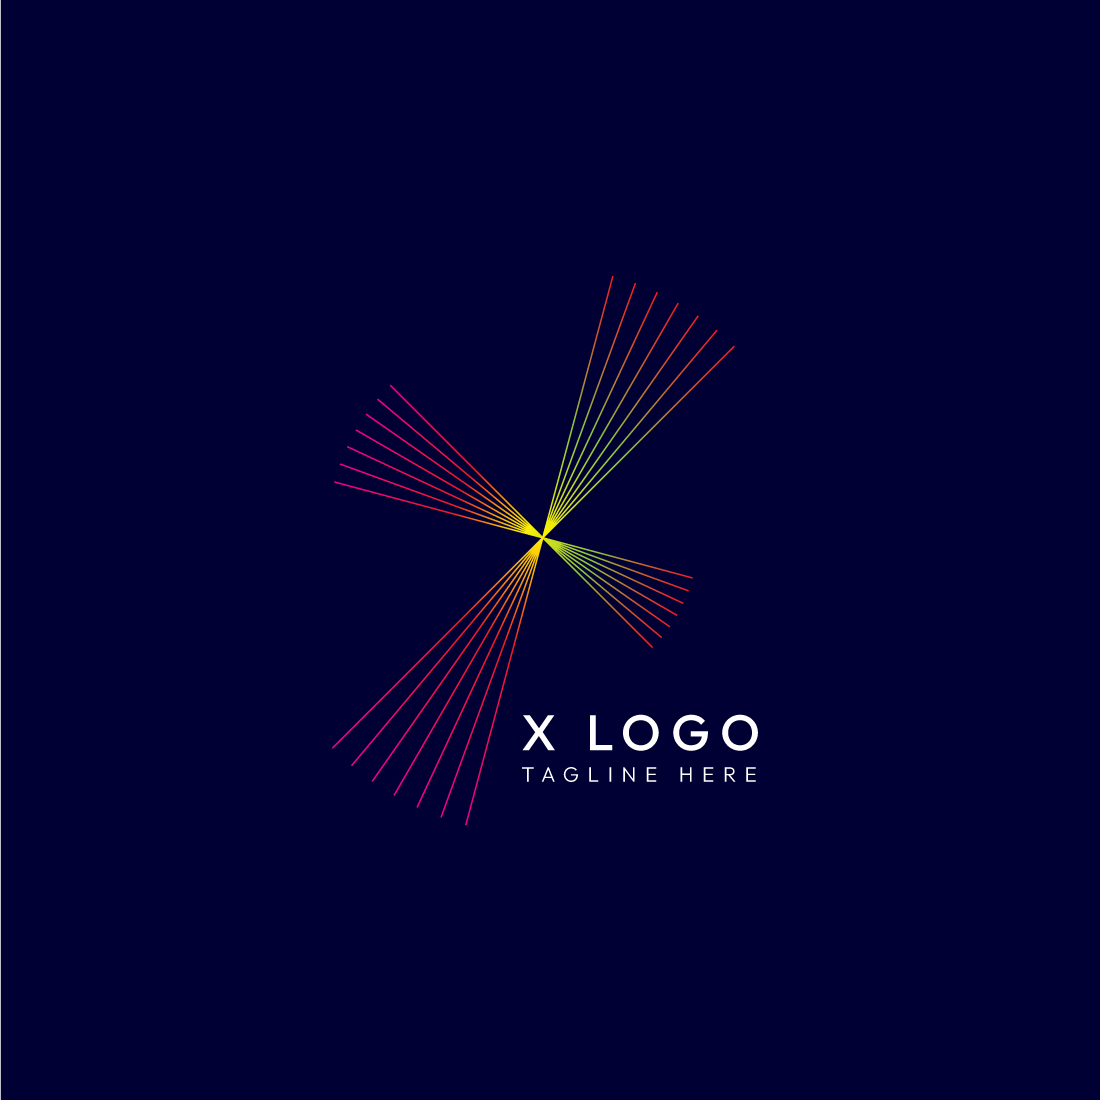 X Logo Design: Professional Logos for Every Industry preview image.